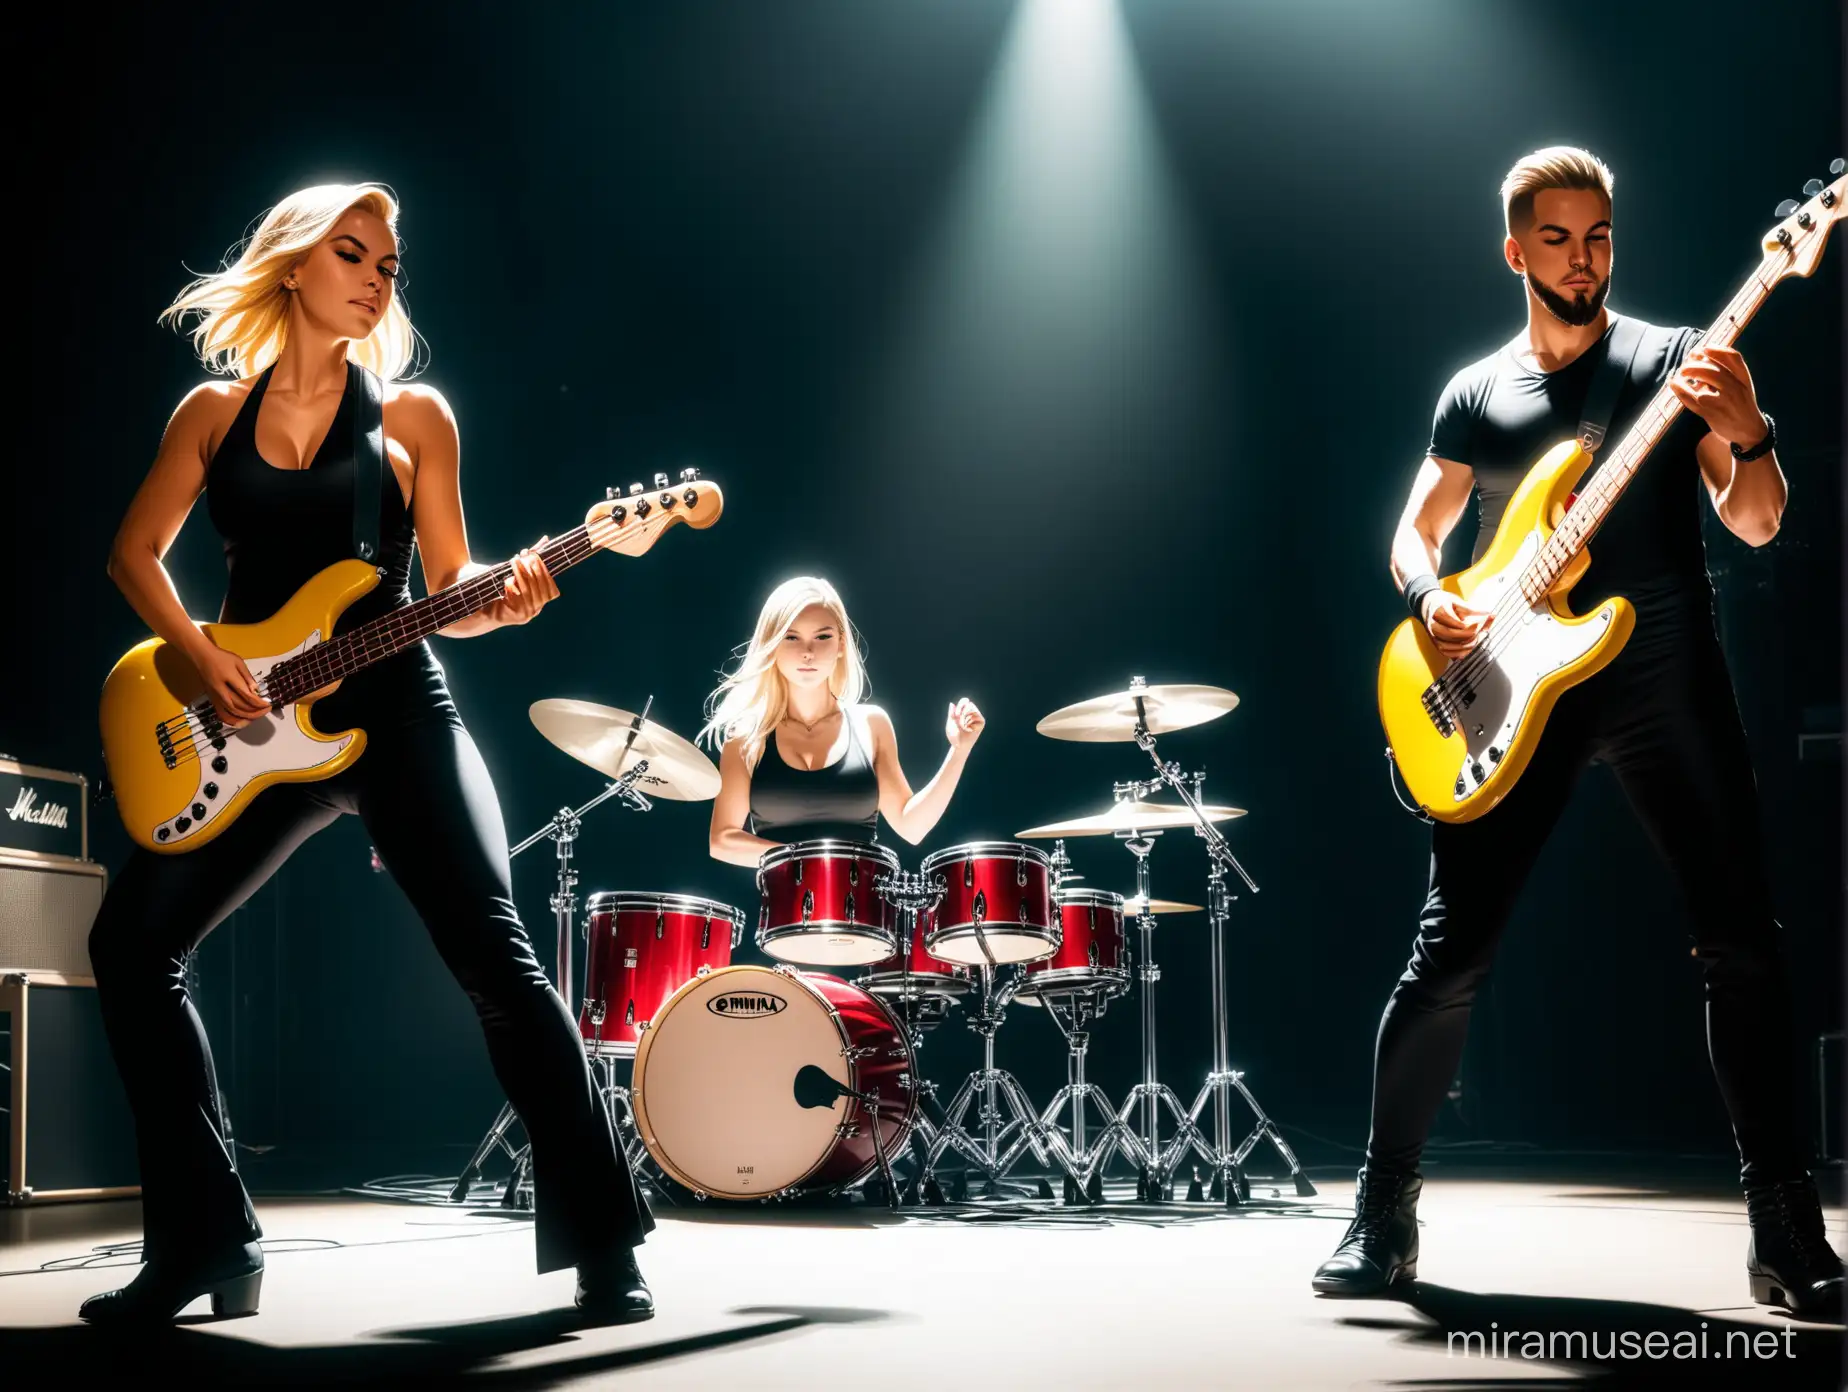 Hero pose of 4 individuals, 1 blonde female in front, 1 male drummer, 1 male guitar player, 1 bass player, cinematic lighting